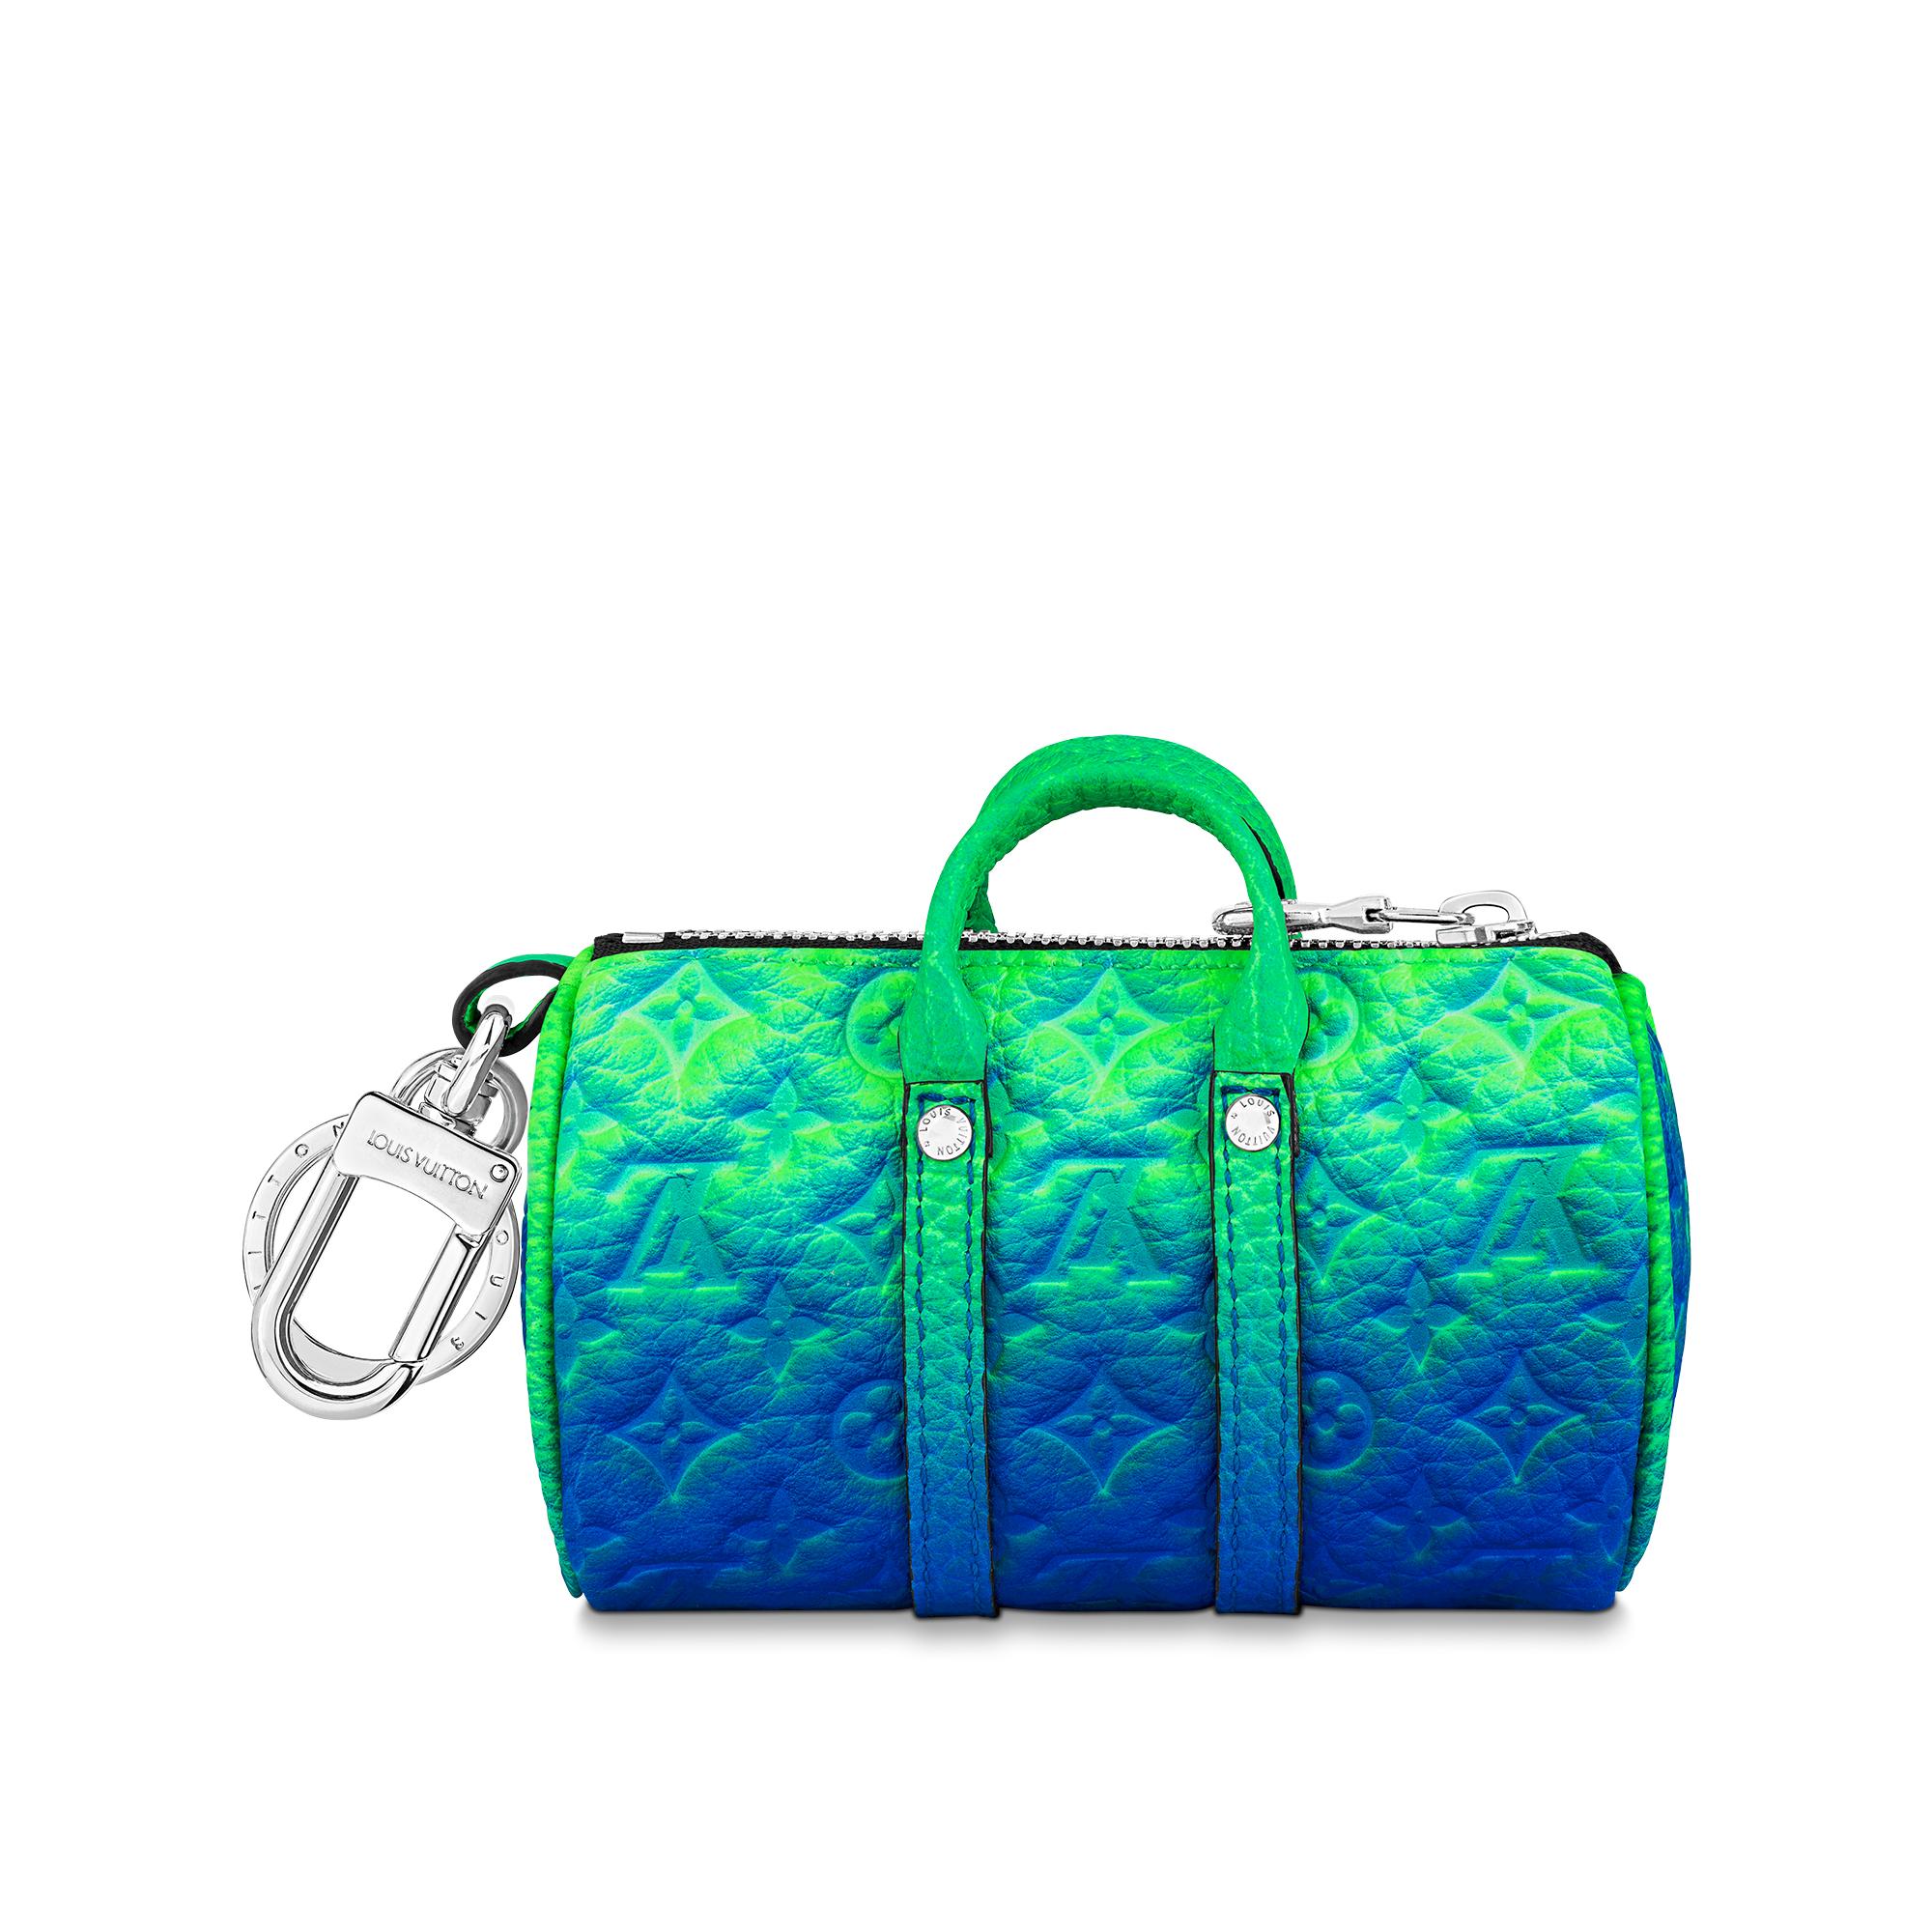 LV Initials Key Holder And Bag Charm S00 - Men - Accessories, LOUIS VUITTON  ® in 2023